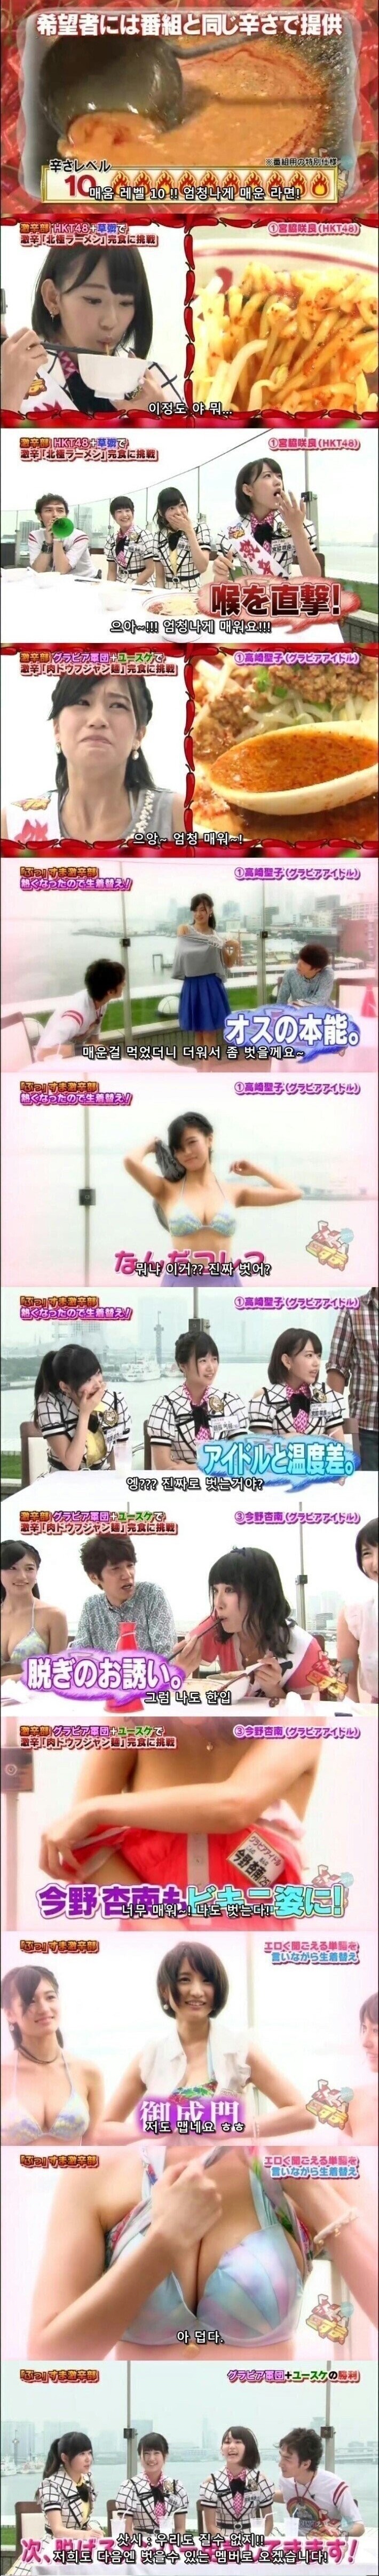 Japanese entertainment show where you take off your clothes whenever it's spicy.